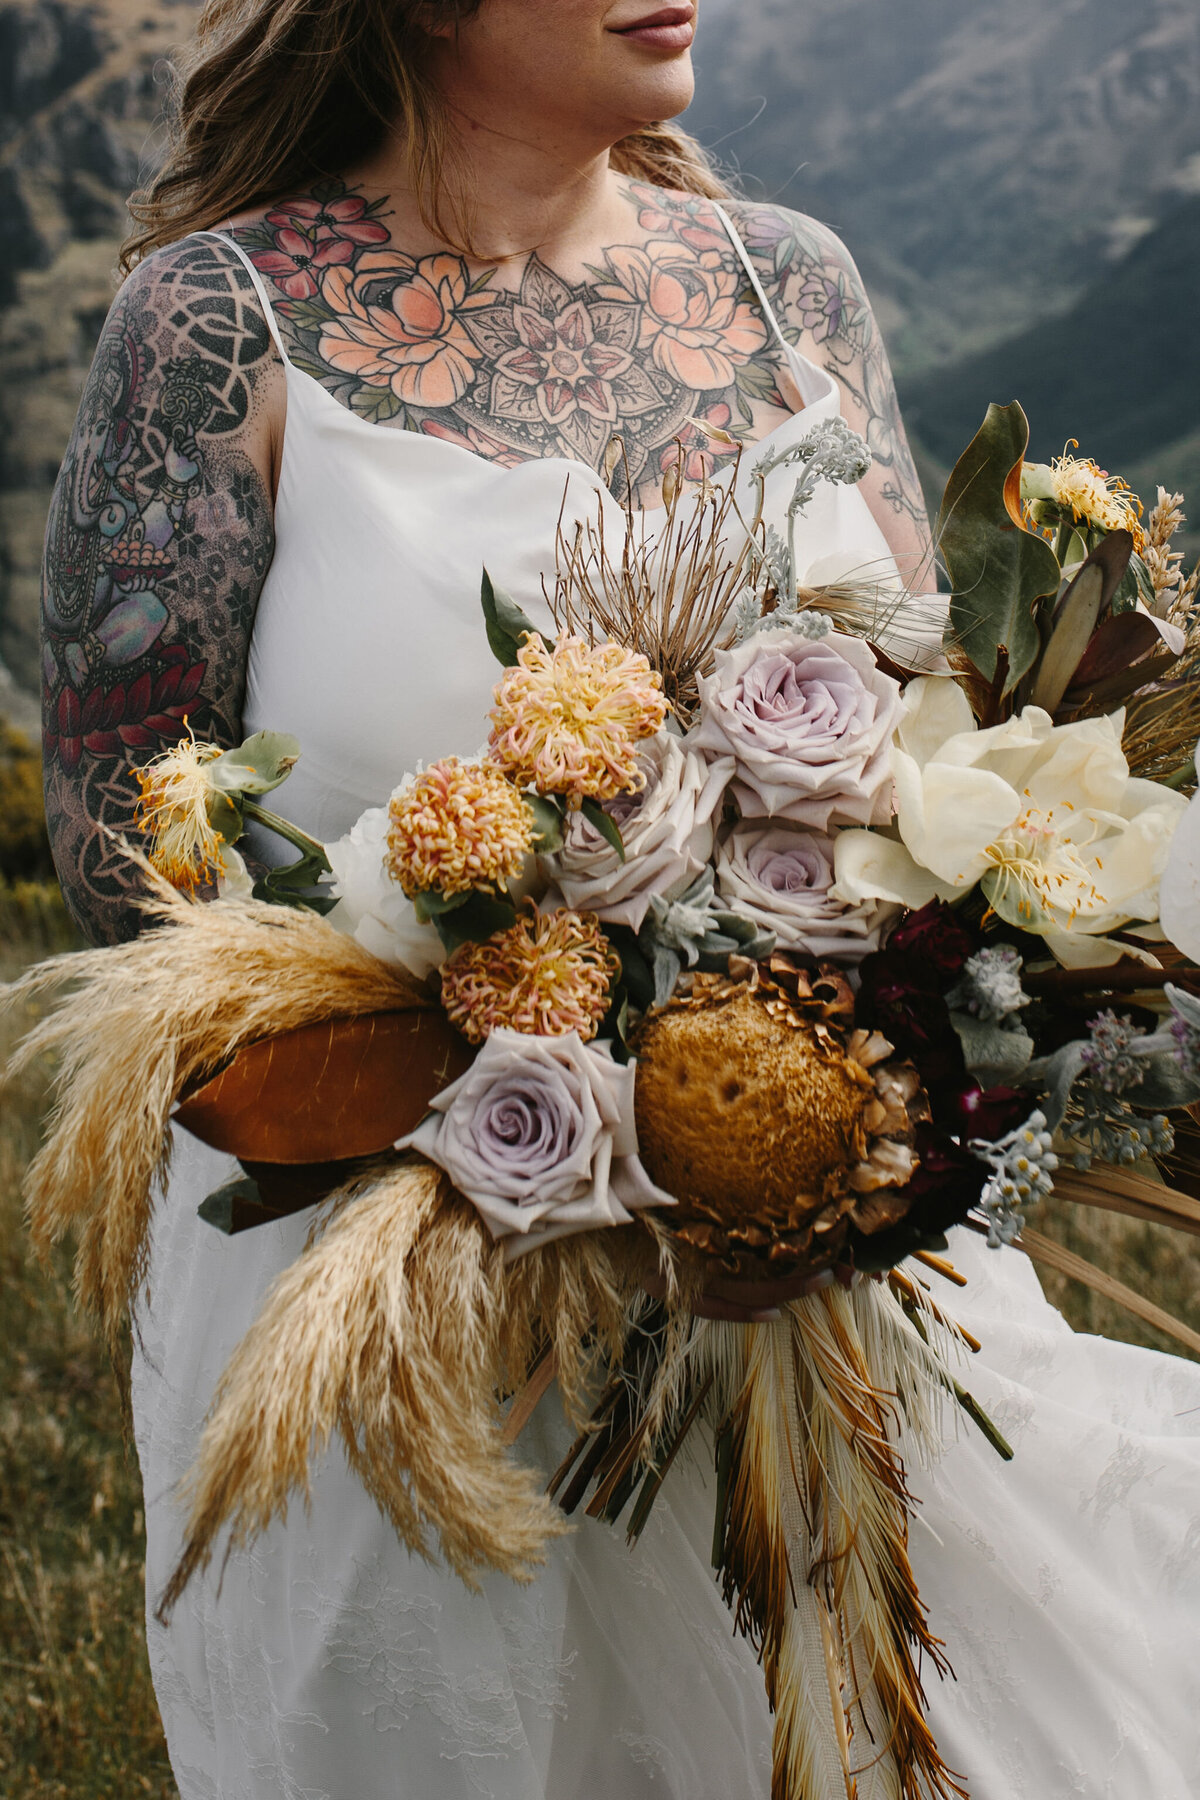 The Vase Floral Co - bridal bouquet designed with long grass and flowers